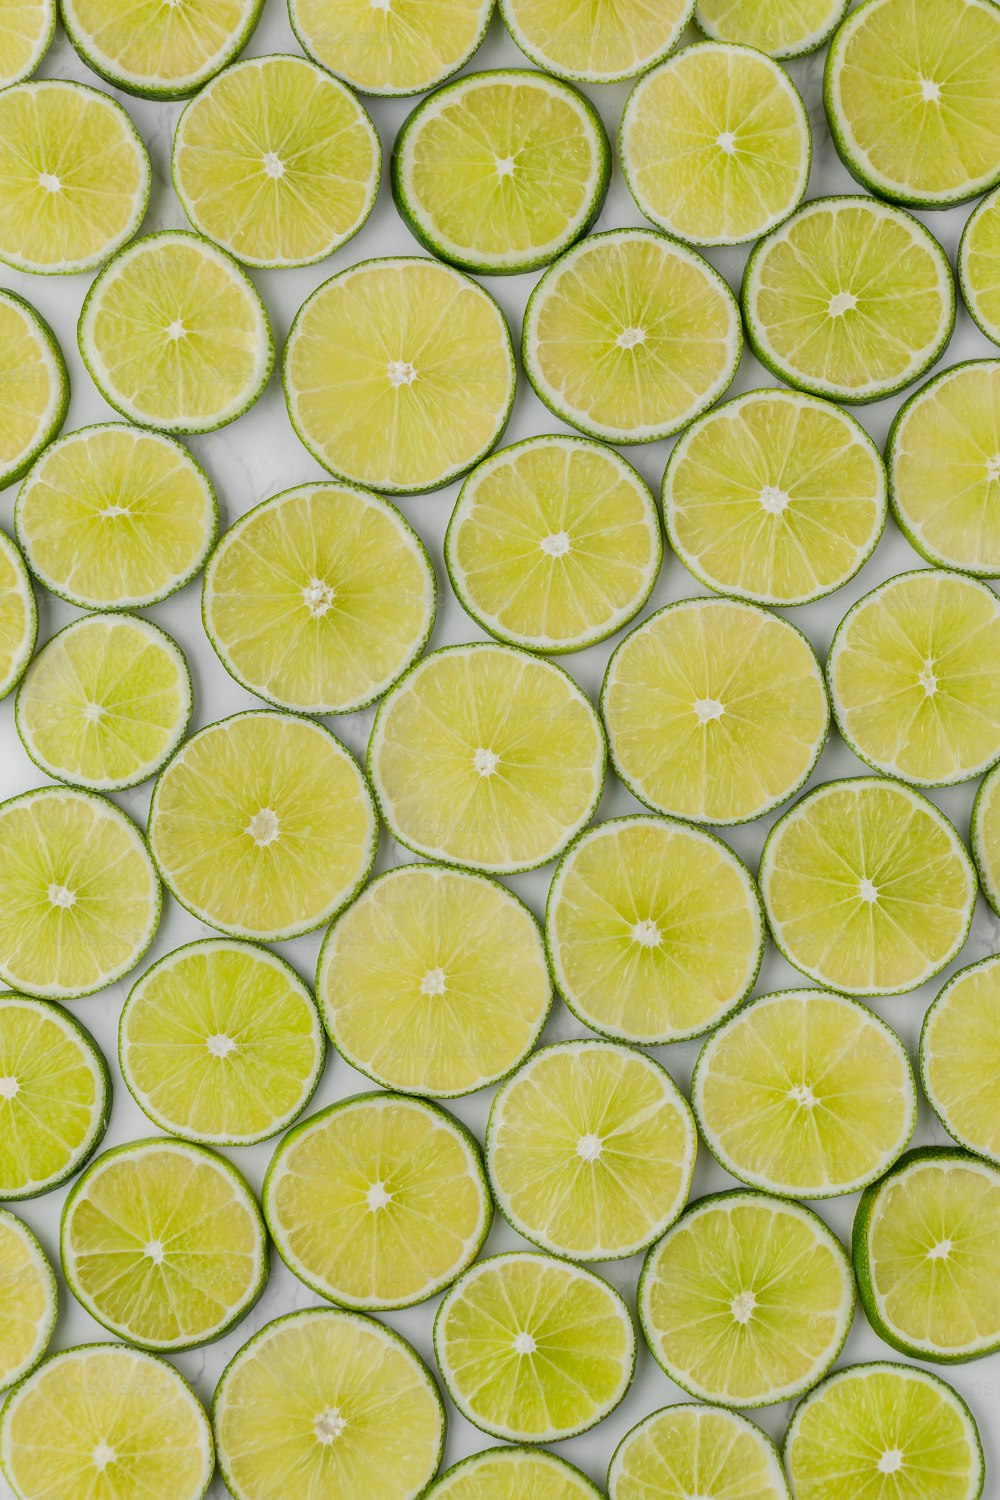 a group of limes cut in half on a white surface